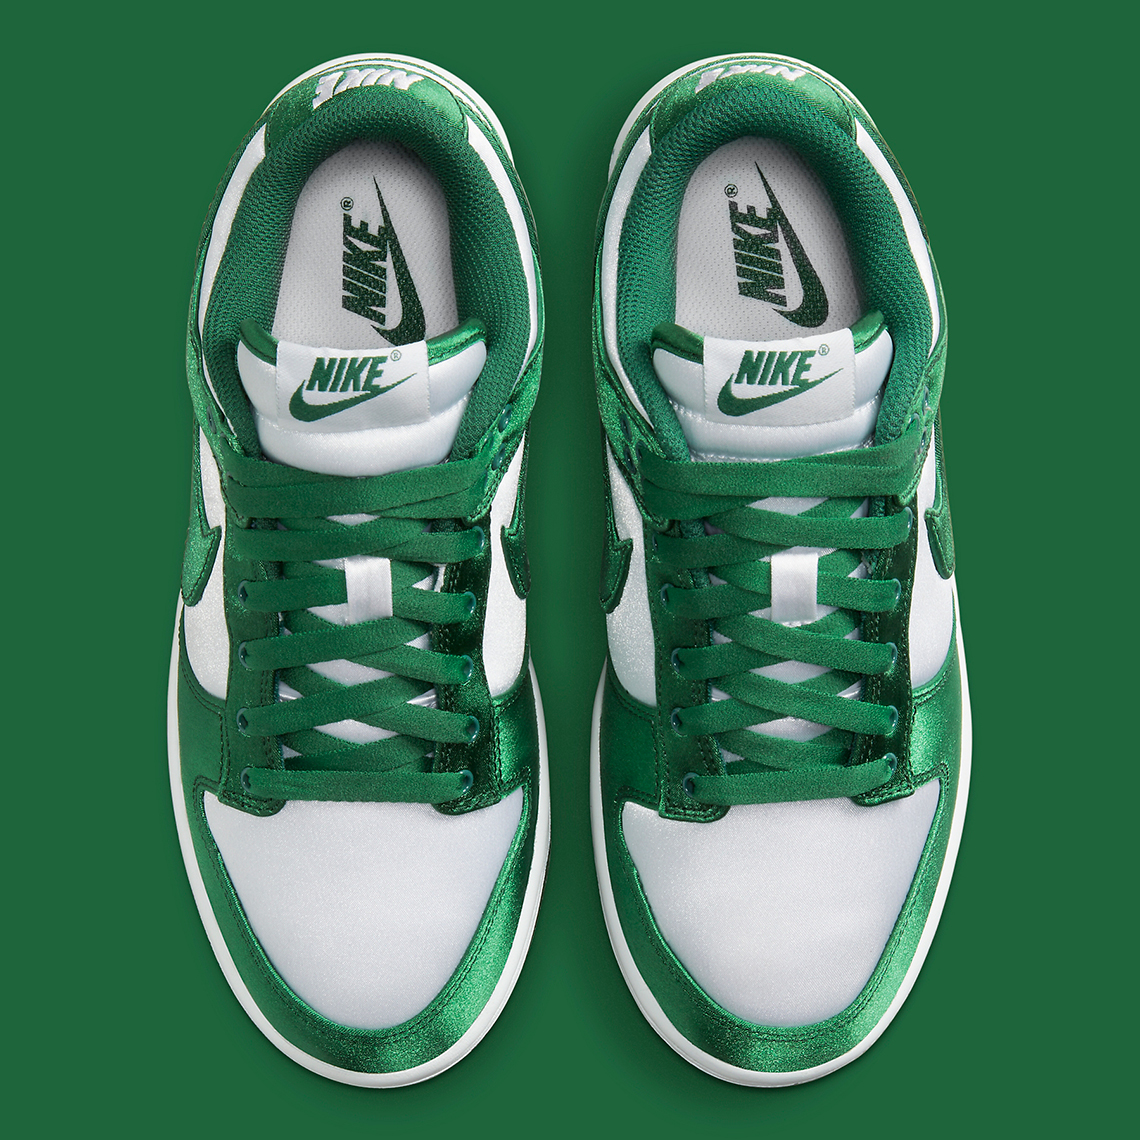 Nike Dunk Low Green Satin Dx5931 100 Release Date 5